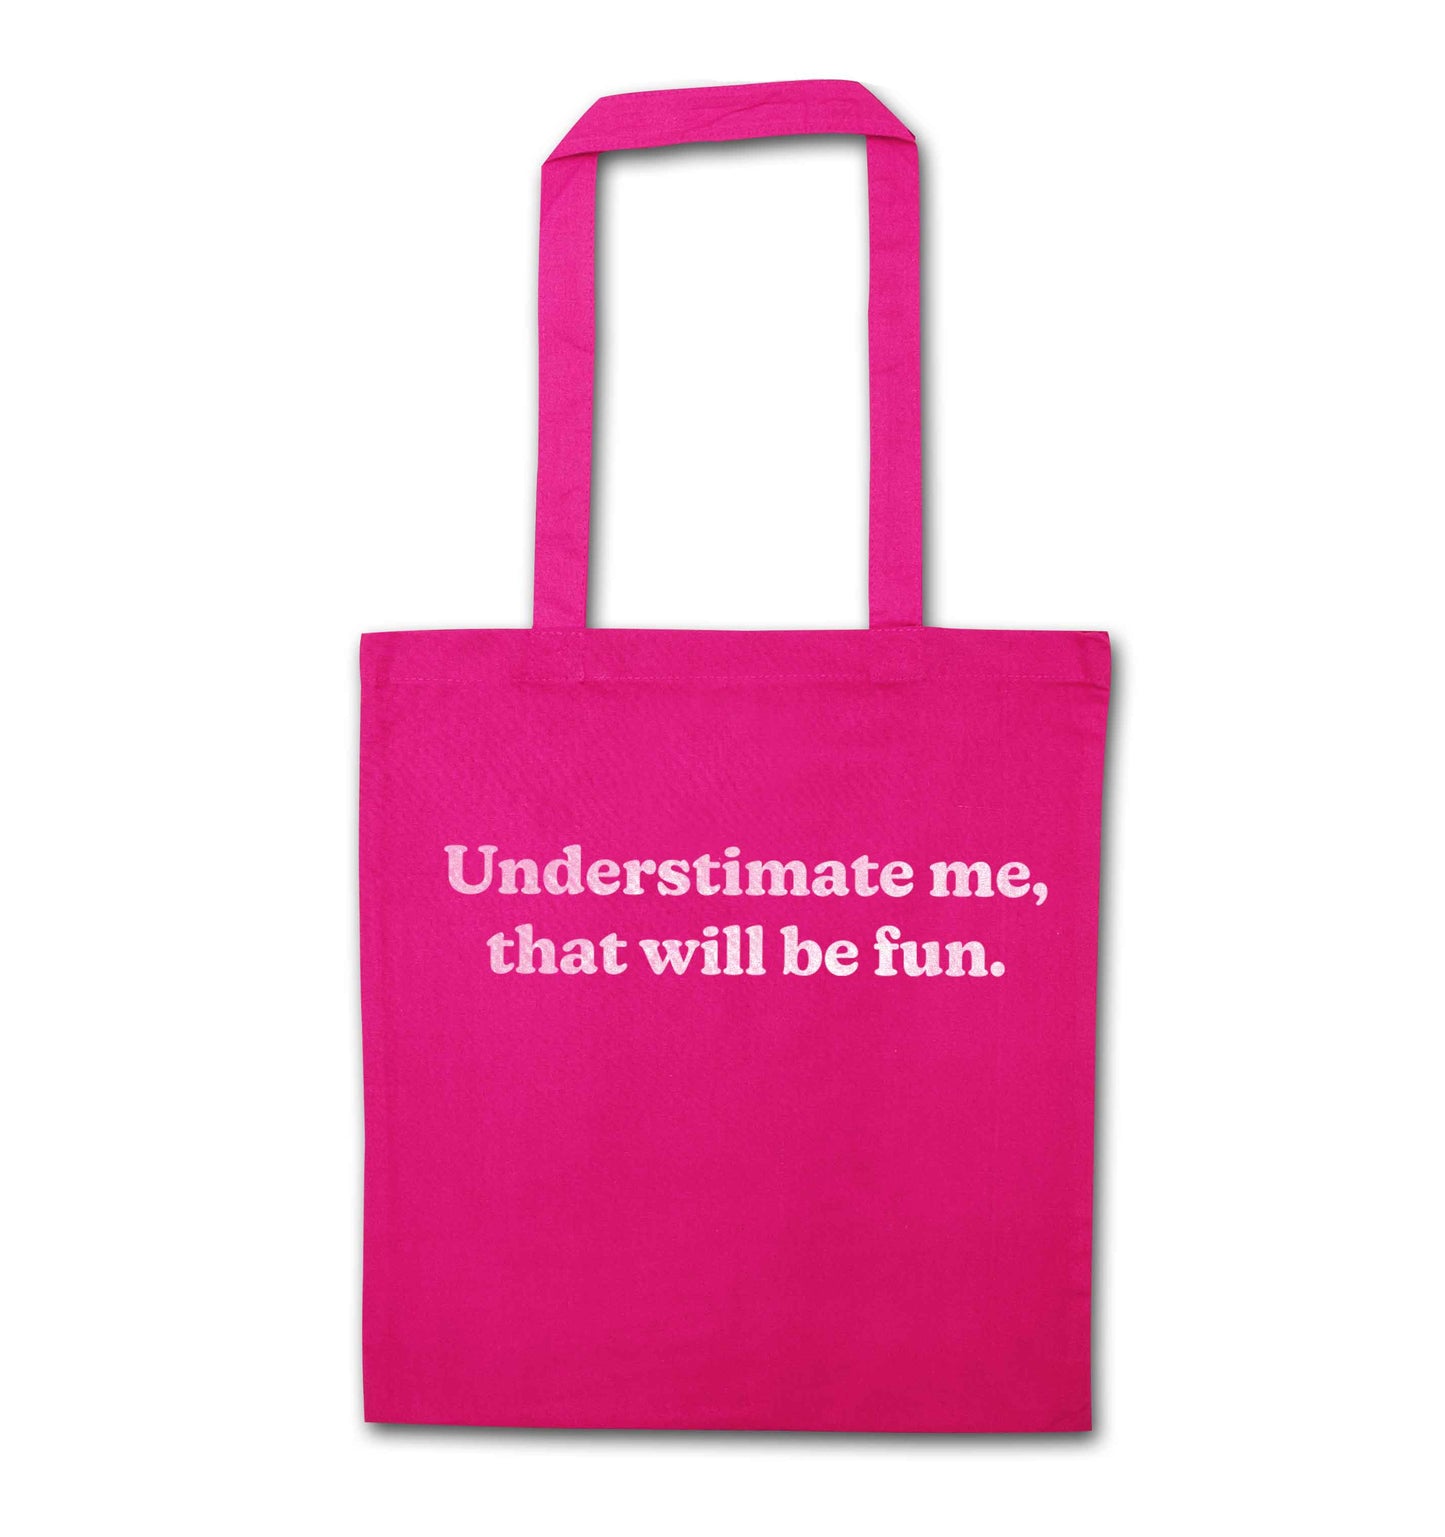 Underestimate me that will be fun pink tote bag